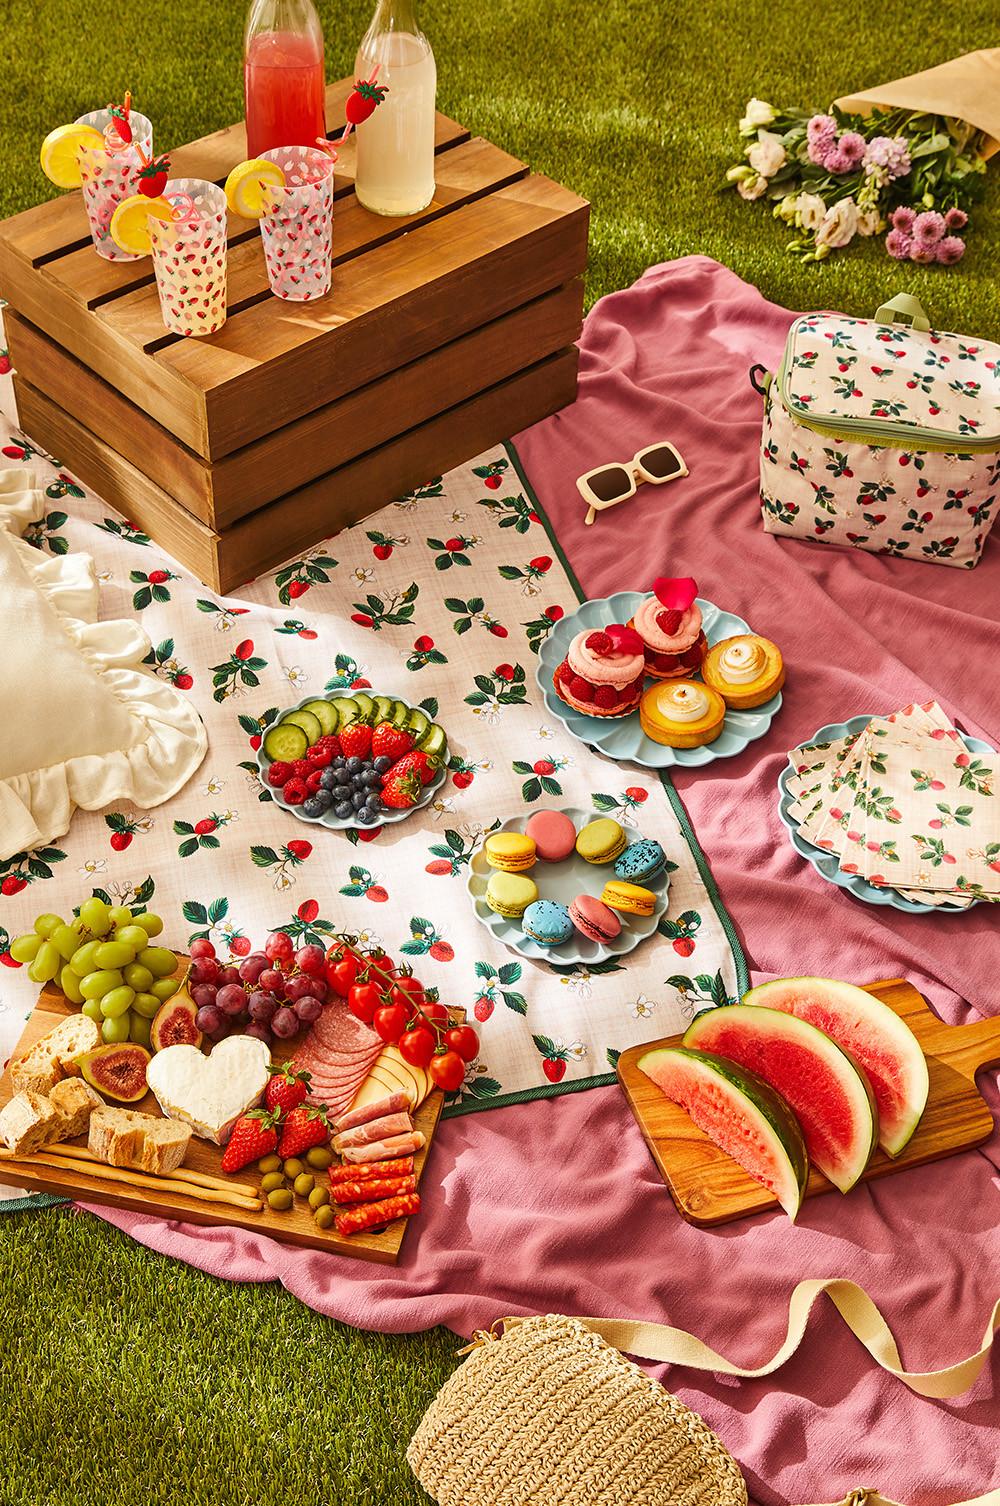 Backyard picnic with blankets, cool bags, plates, cups